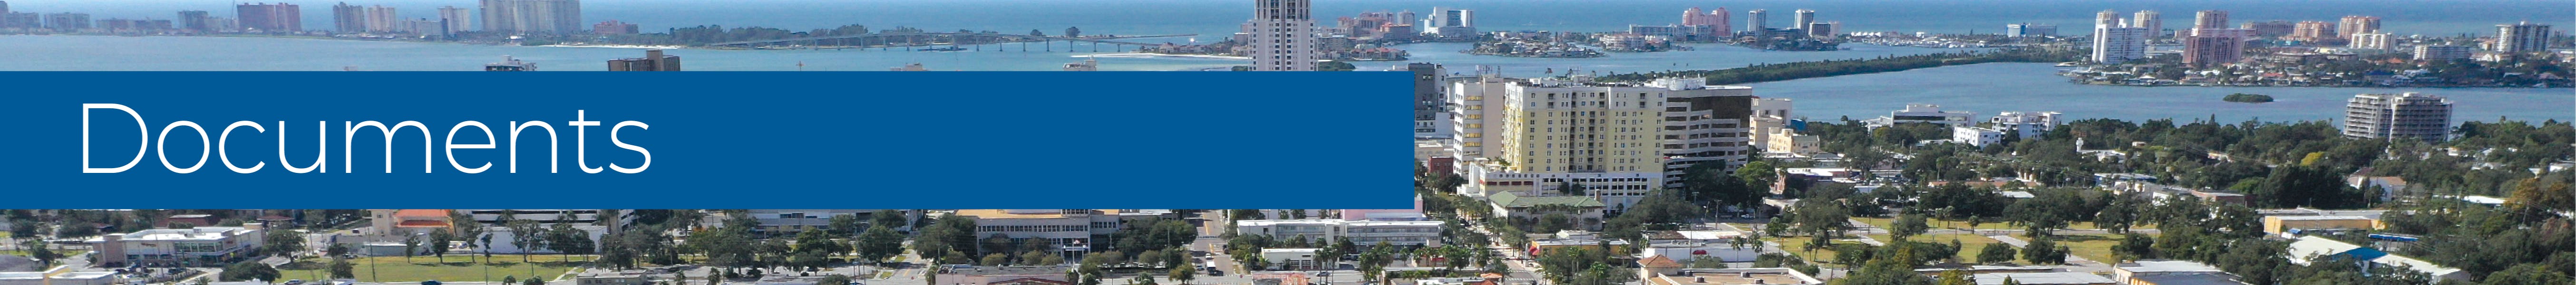 Aerial image of Clearwater looking west towards the beach and Memorial Causeway. Text over image says "Documents".